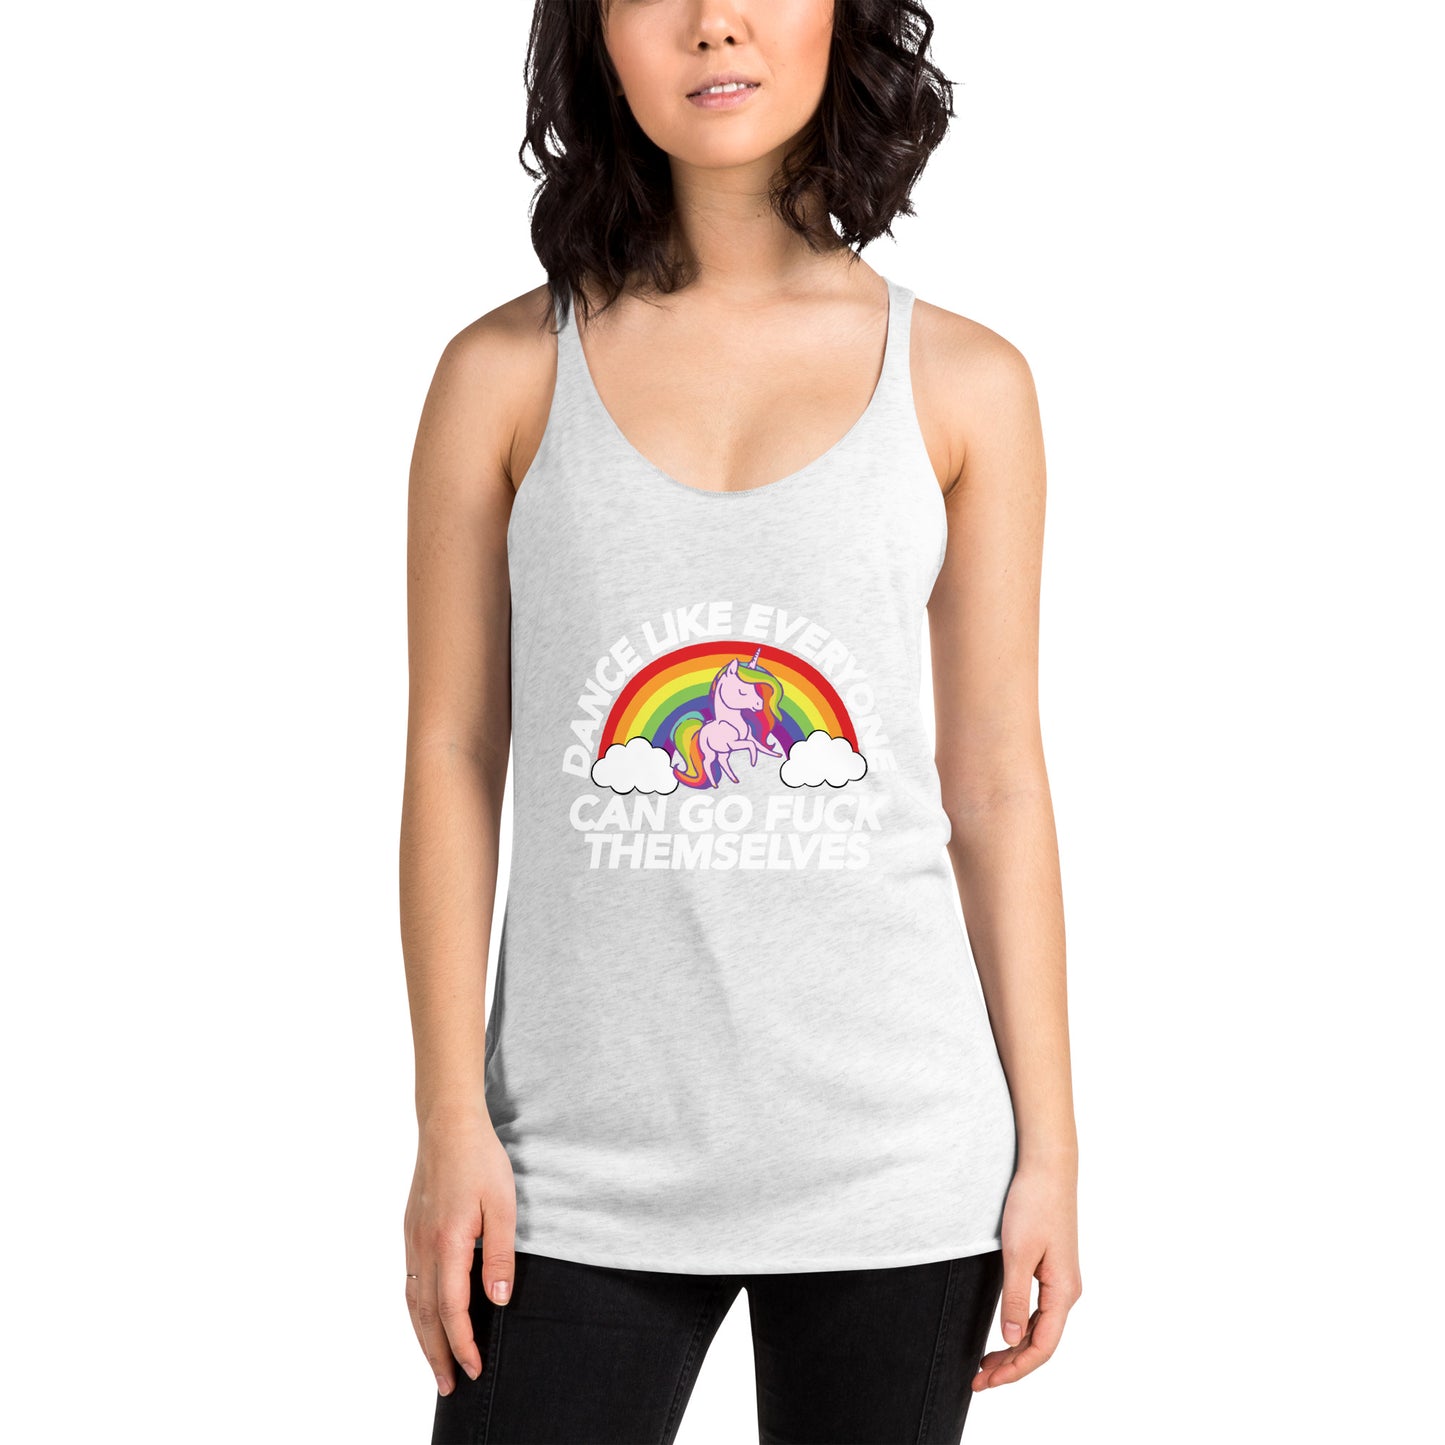 Dance Like Everyone Can Go F**k Themselves - Women's Racerback Tank